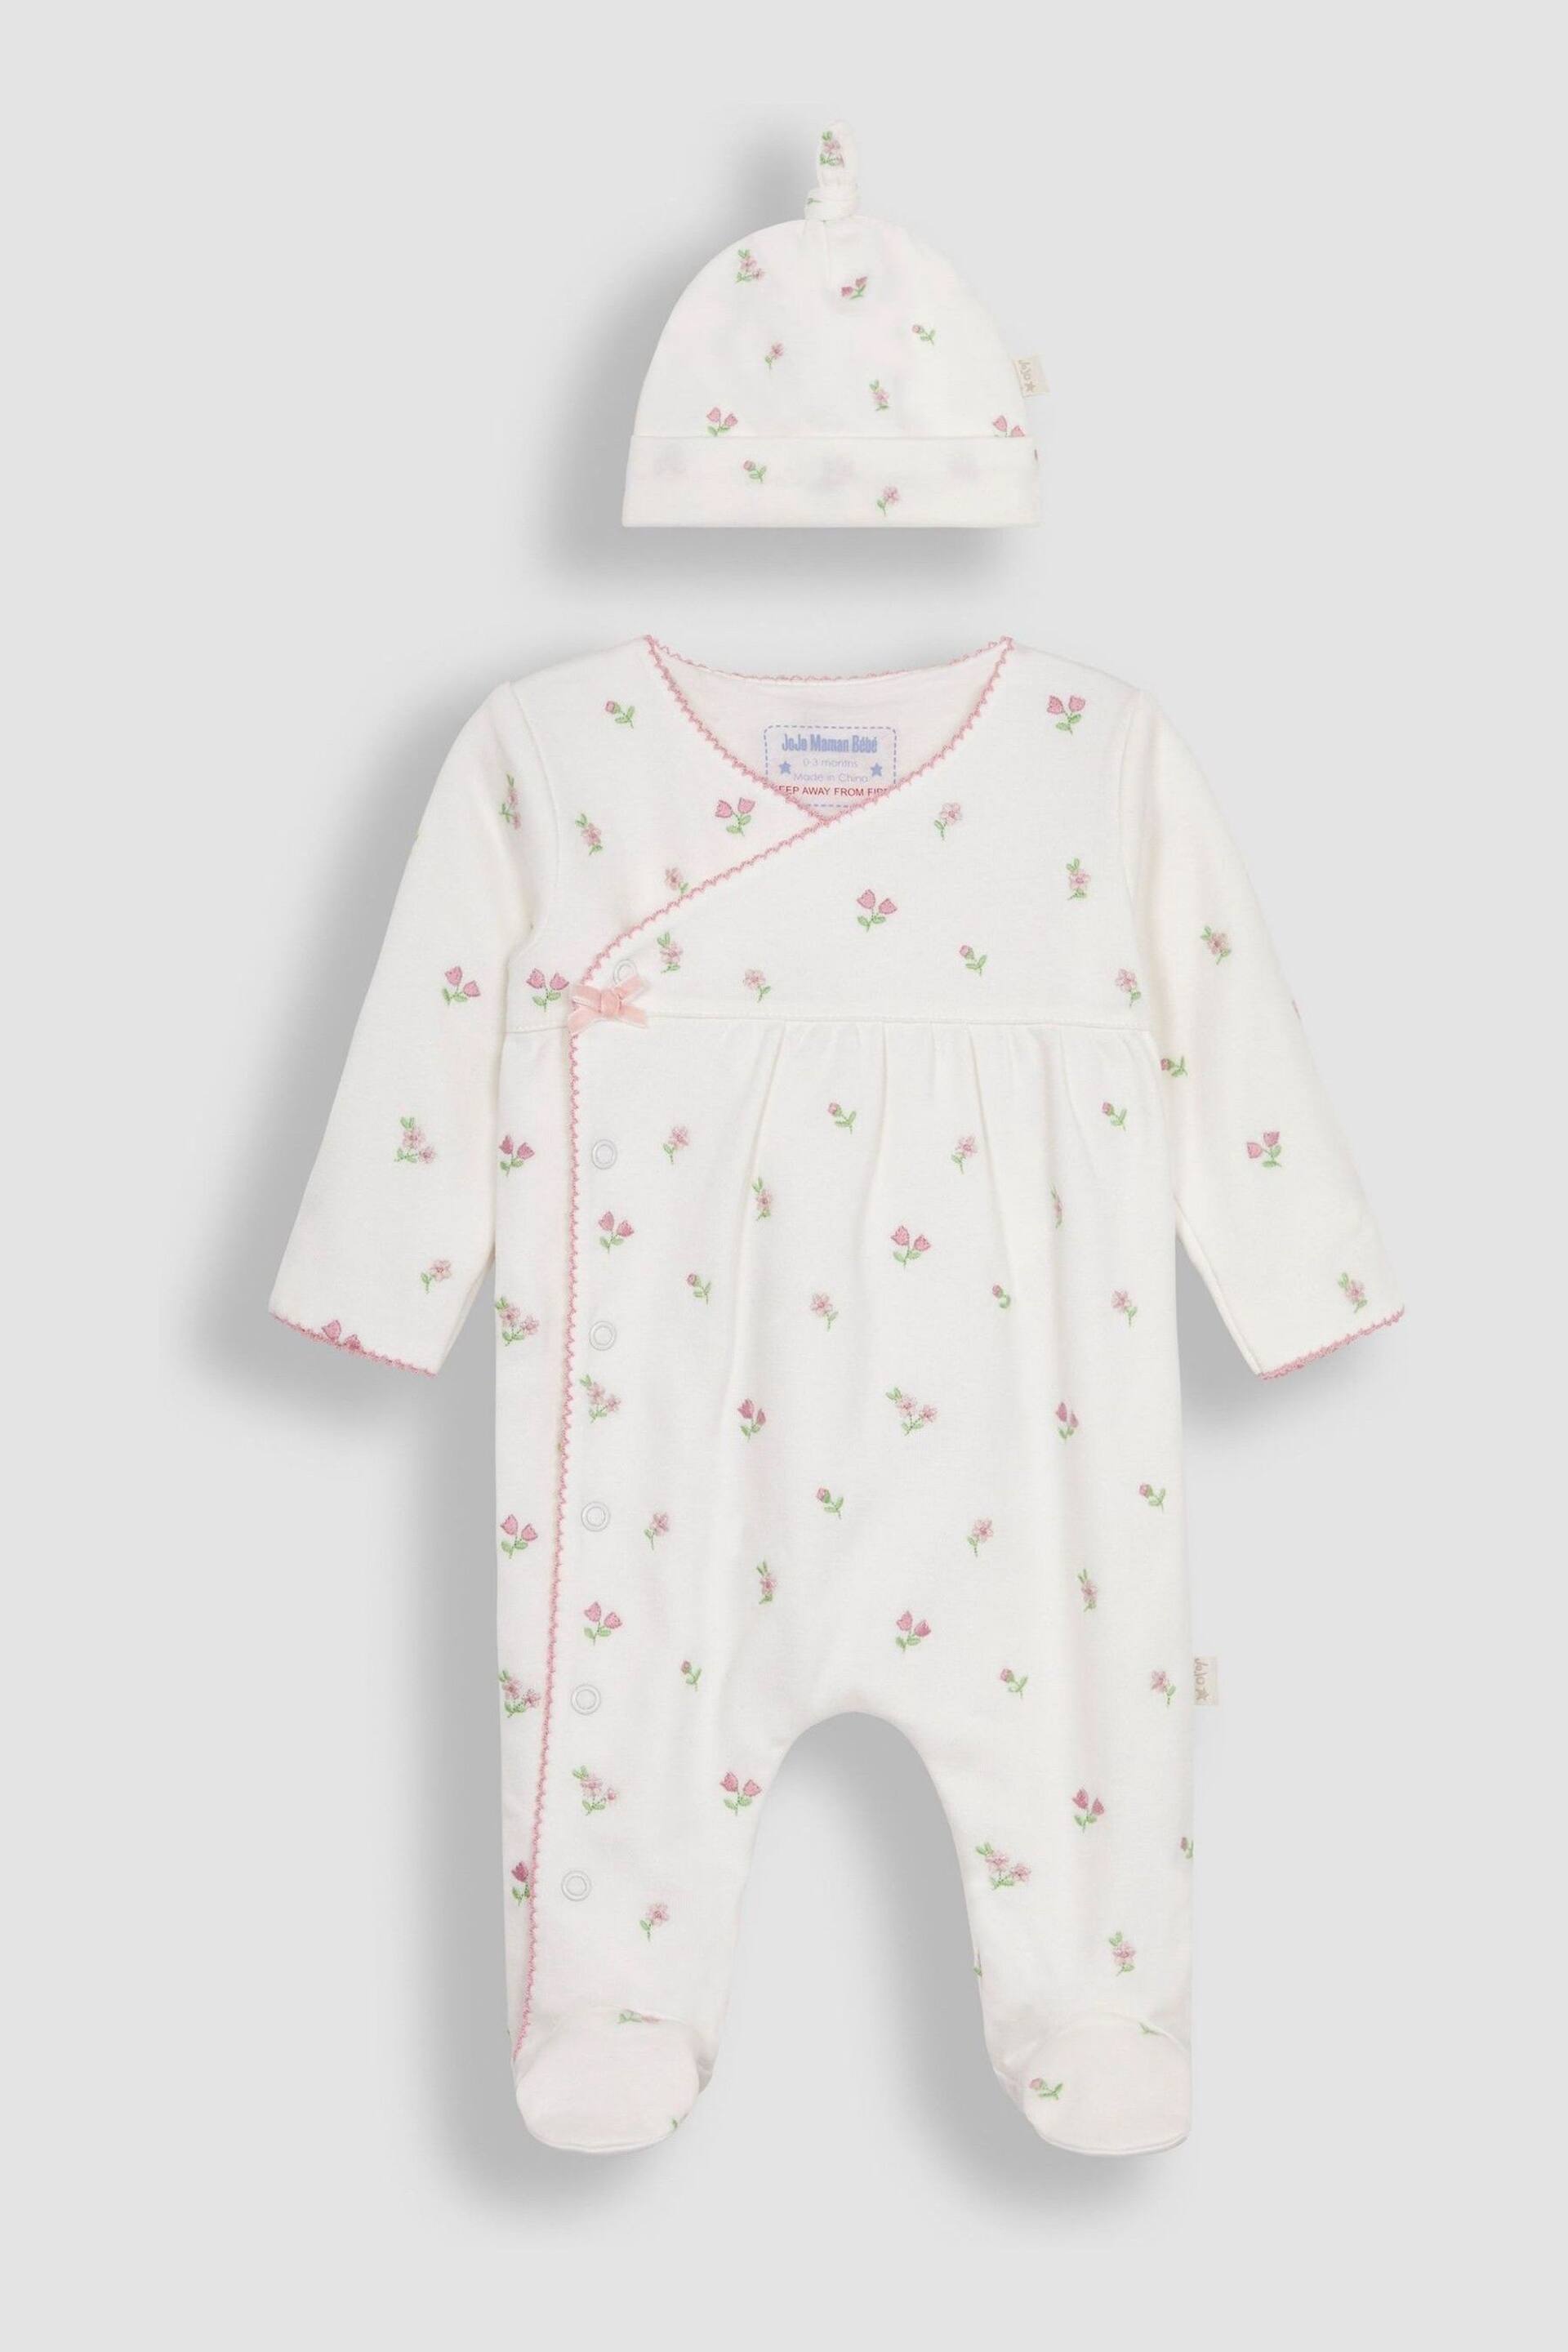 JoJo Maman Bébé Cream Floral Embroidered Pretty Sleepsuit & Hat - Image 1 of 5